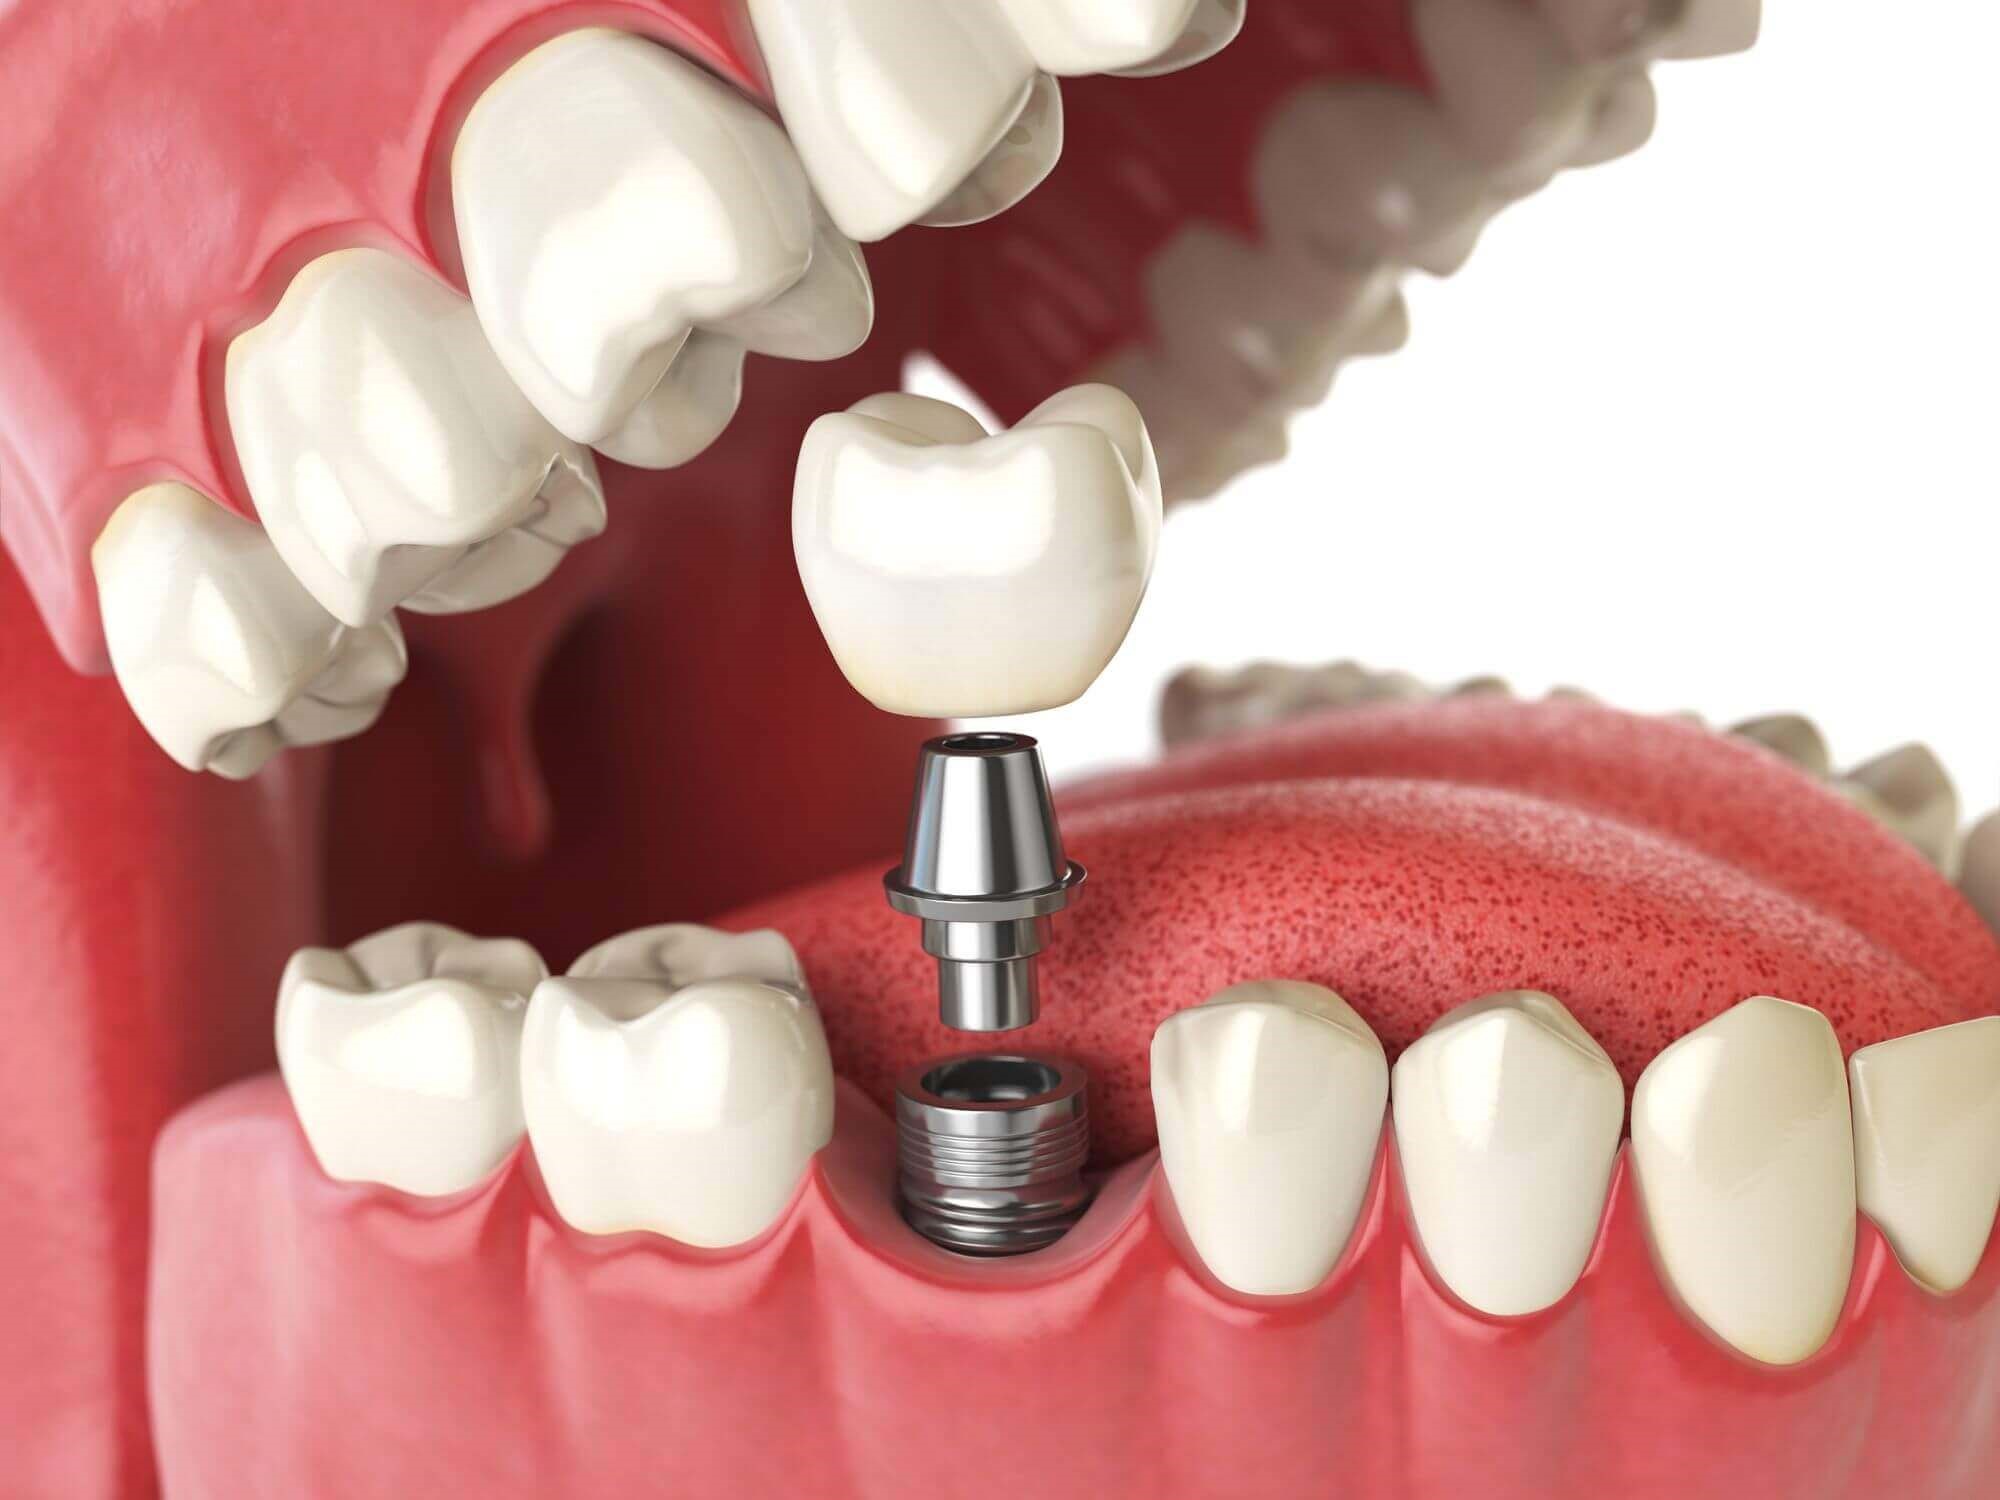 Risks of implants for the gums